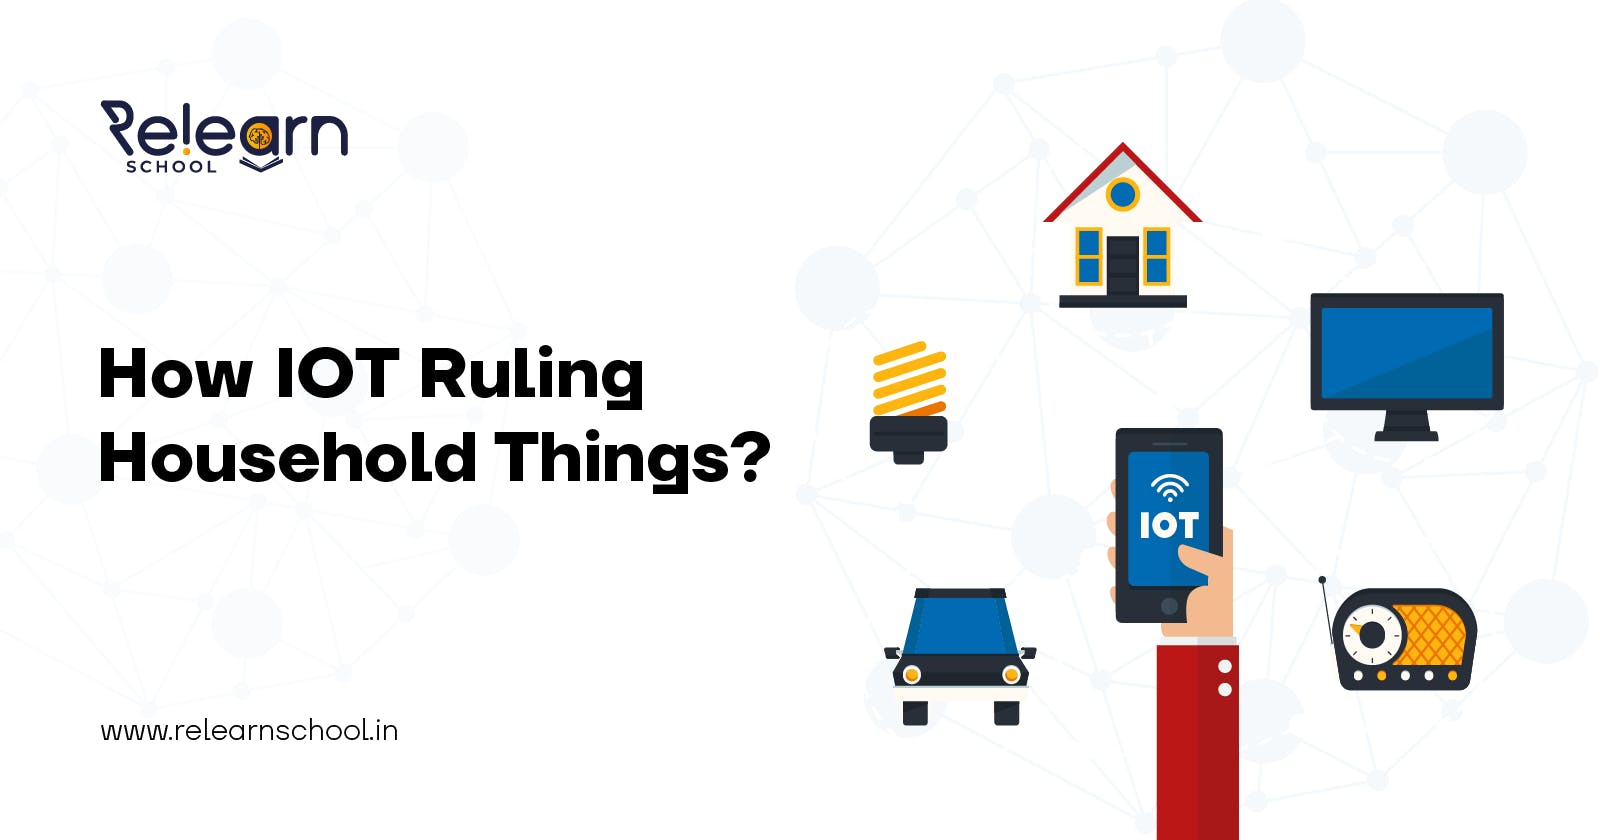 How IOT Ruling Household Things?